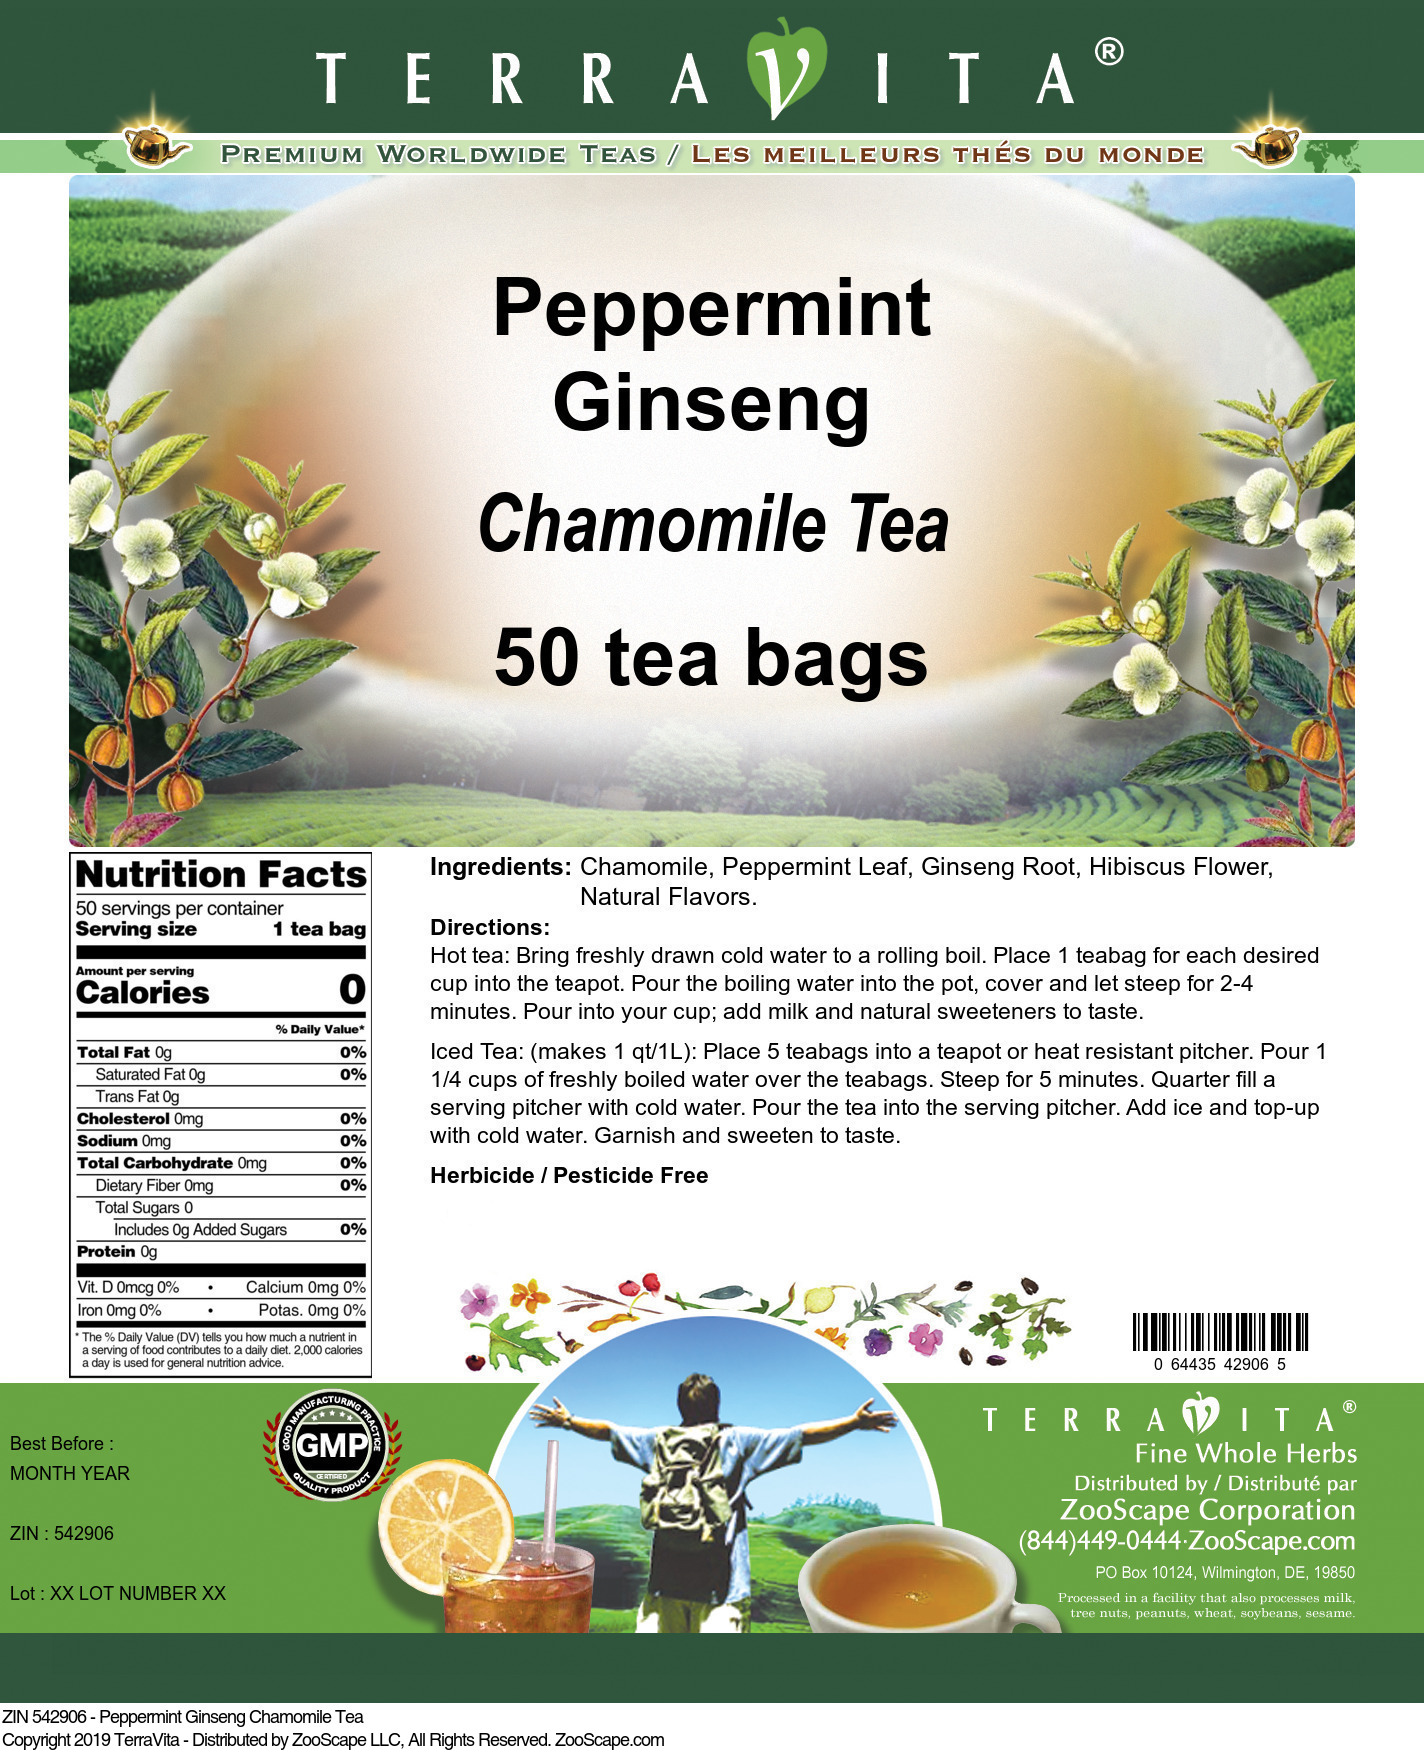 Peppermint Ginseng Chamomile Tea - Label